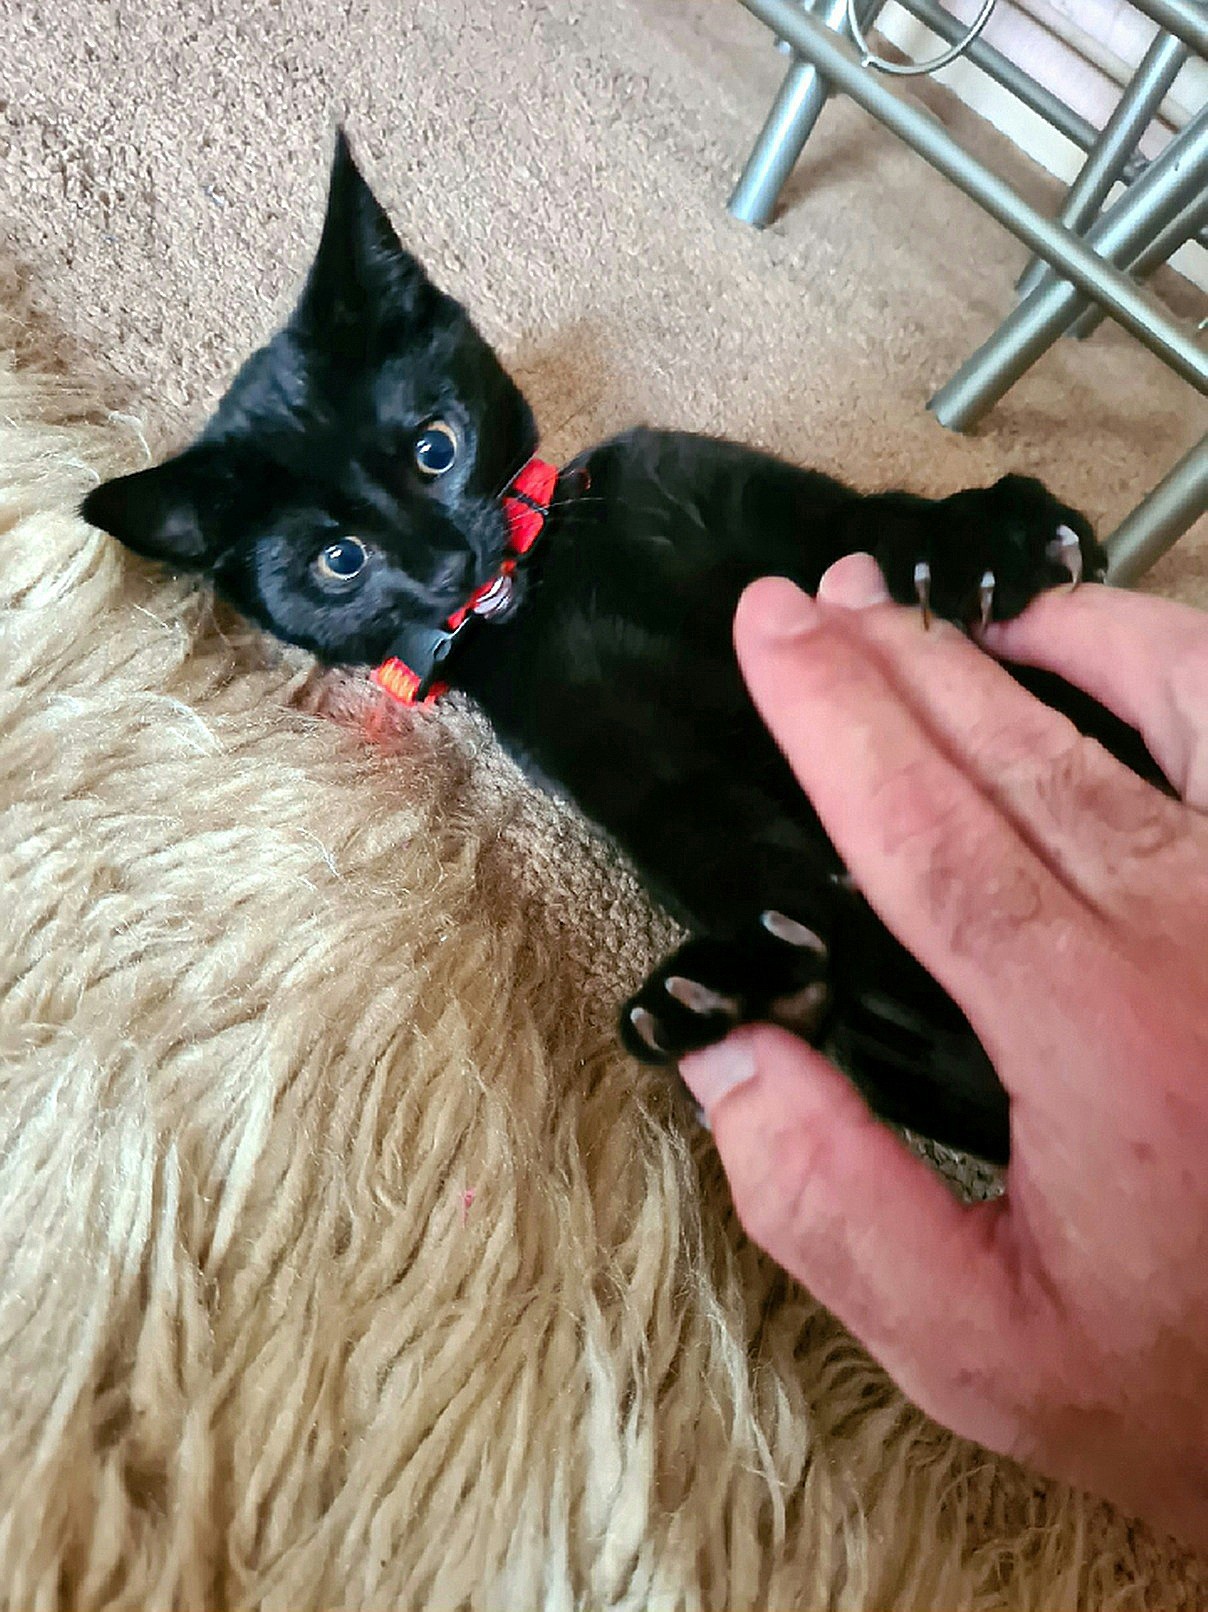 Step 1. A tiny black kitten, not much larger than my hand, lies on his back & playfully grabs my fingers with his tiny claws out.
